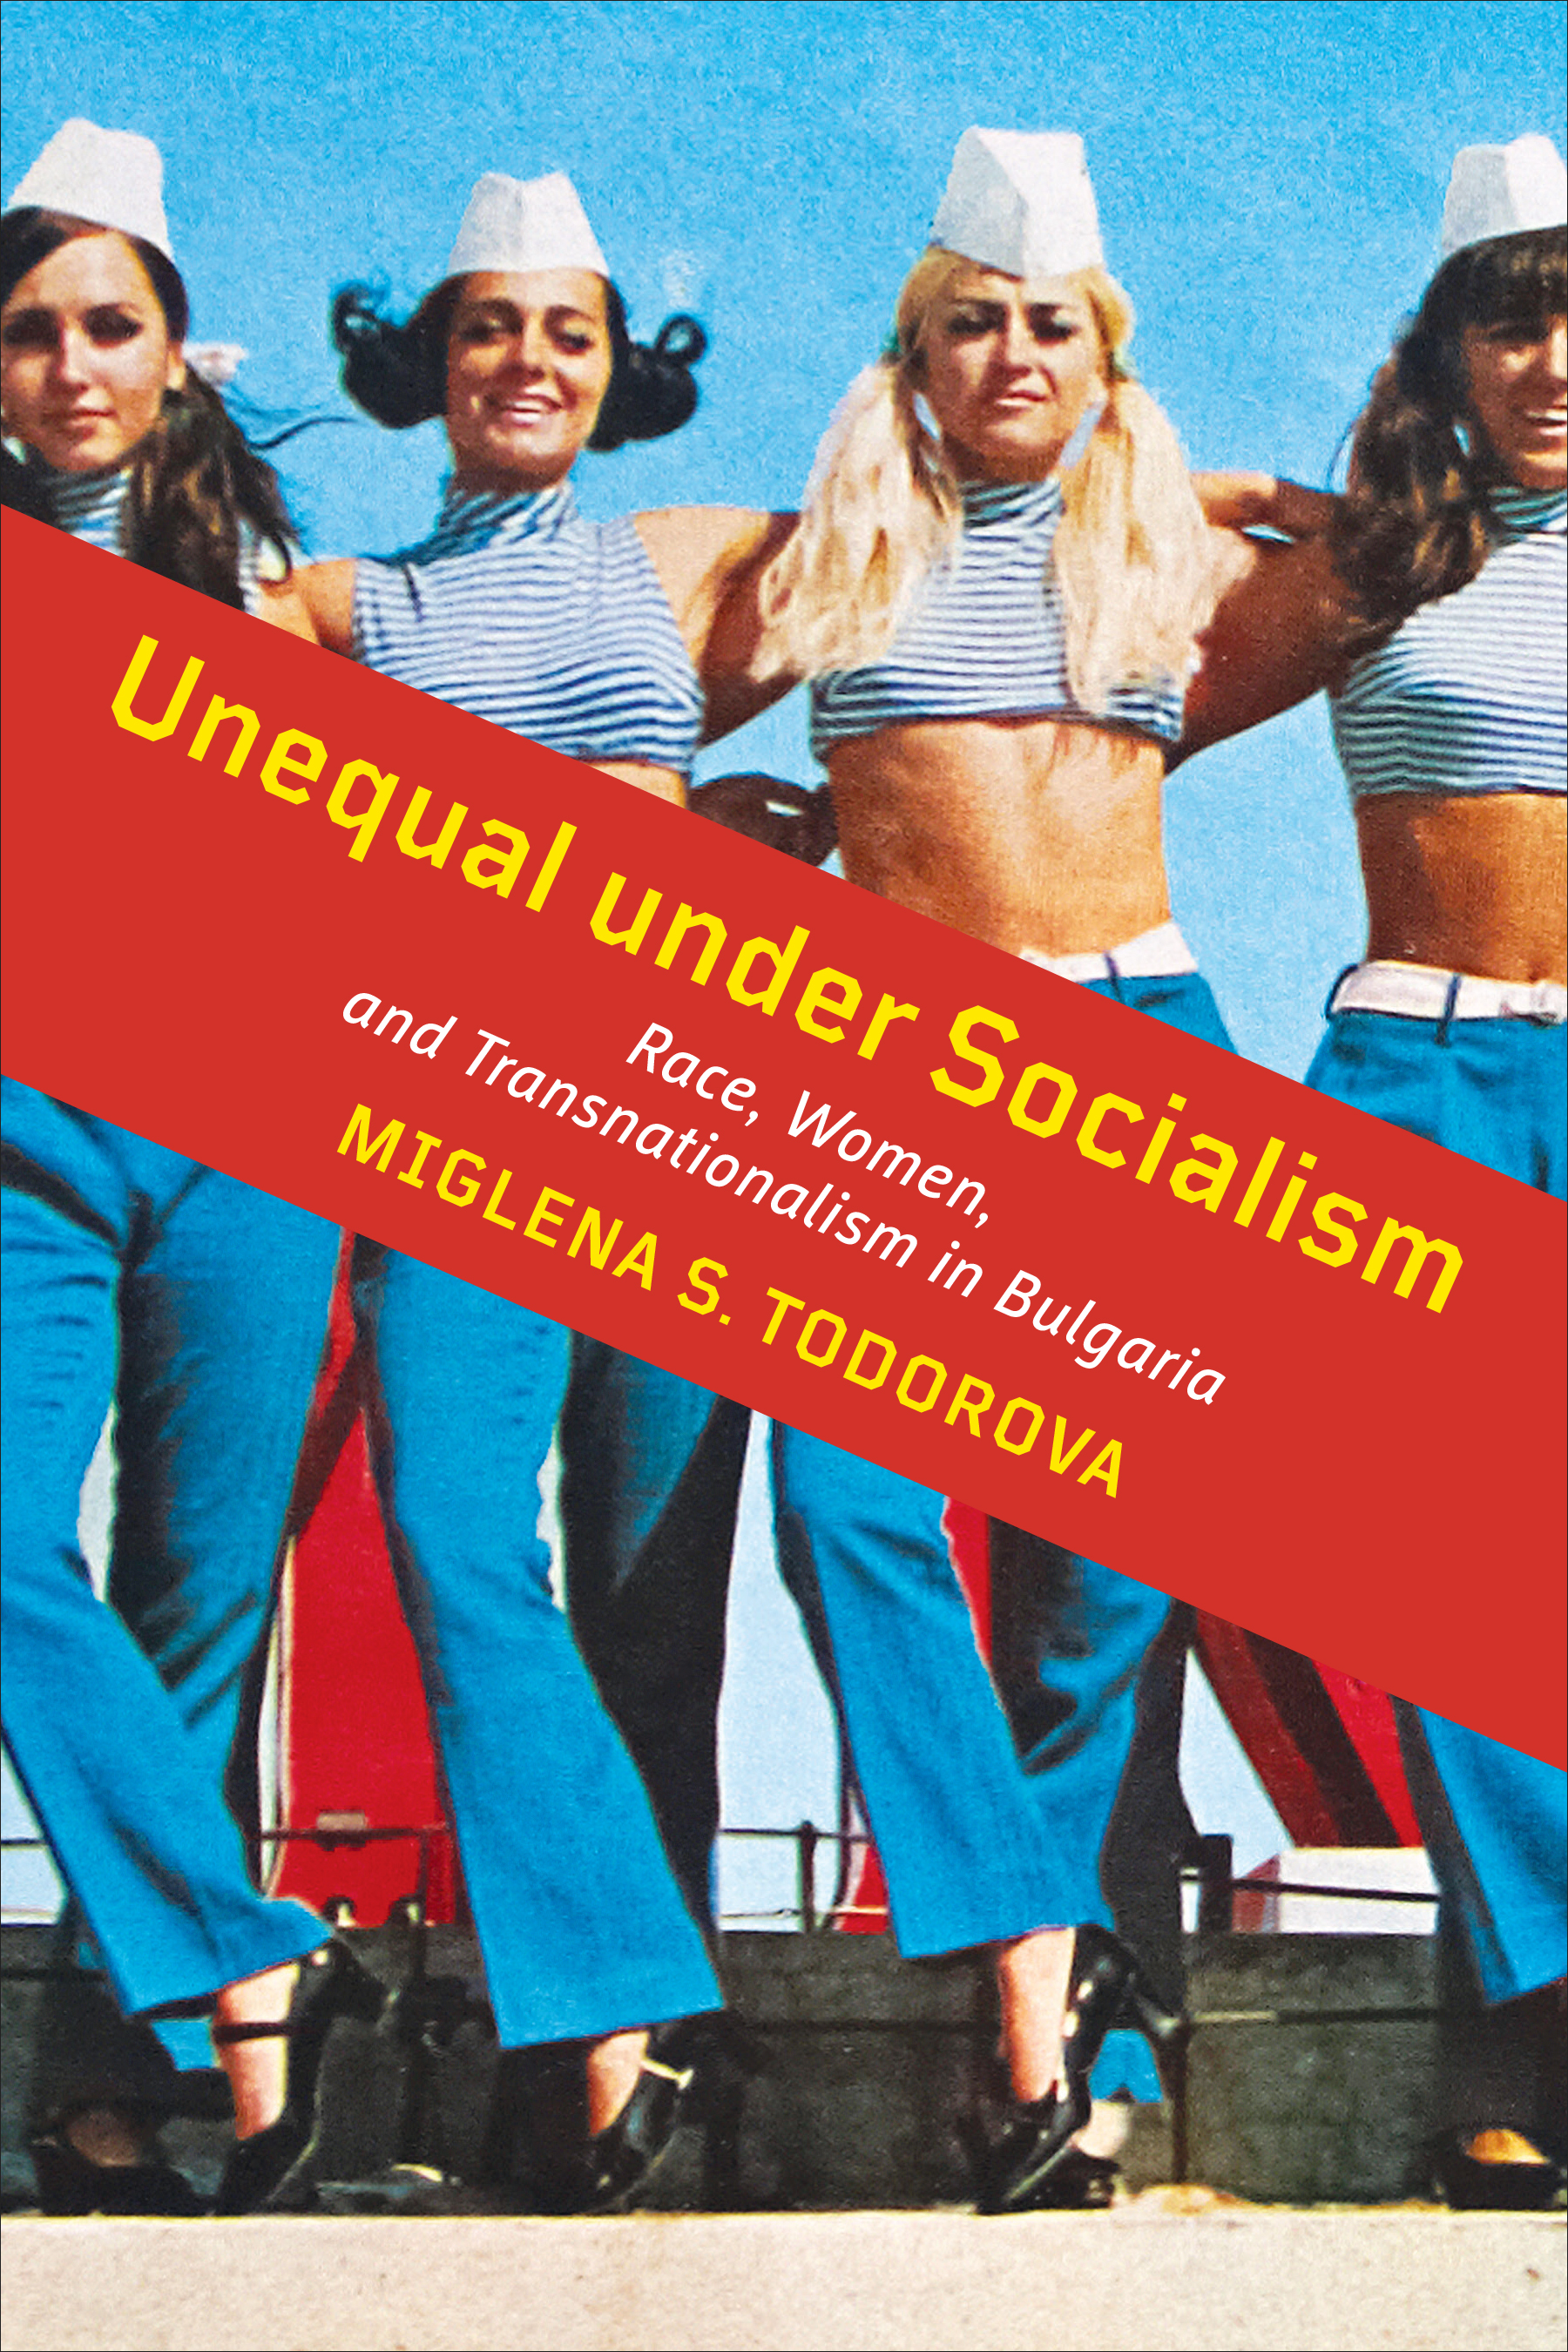 Unequal under Socialism : Race, Women, and Transnationalism in Bulgaria | Todorova, Miglena S.